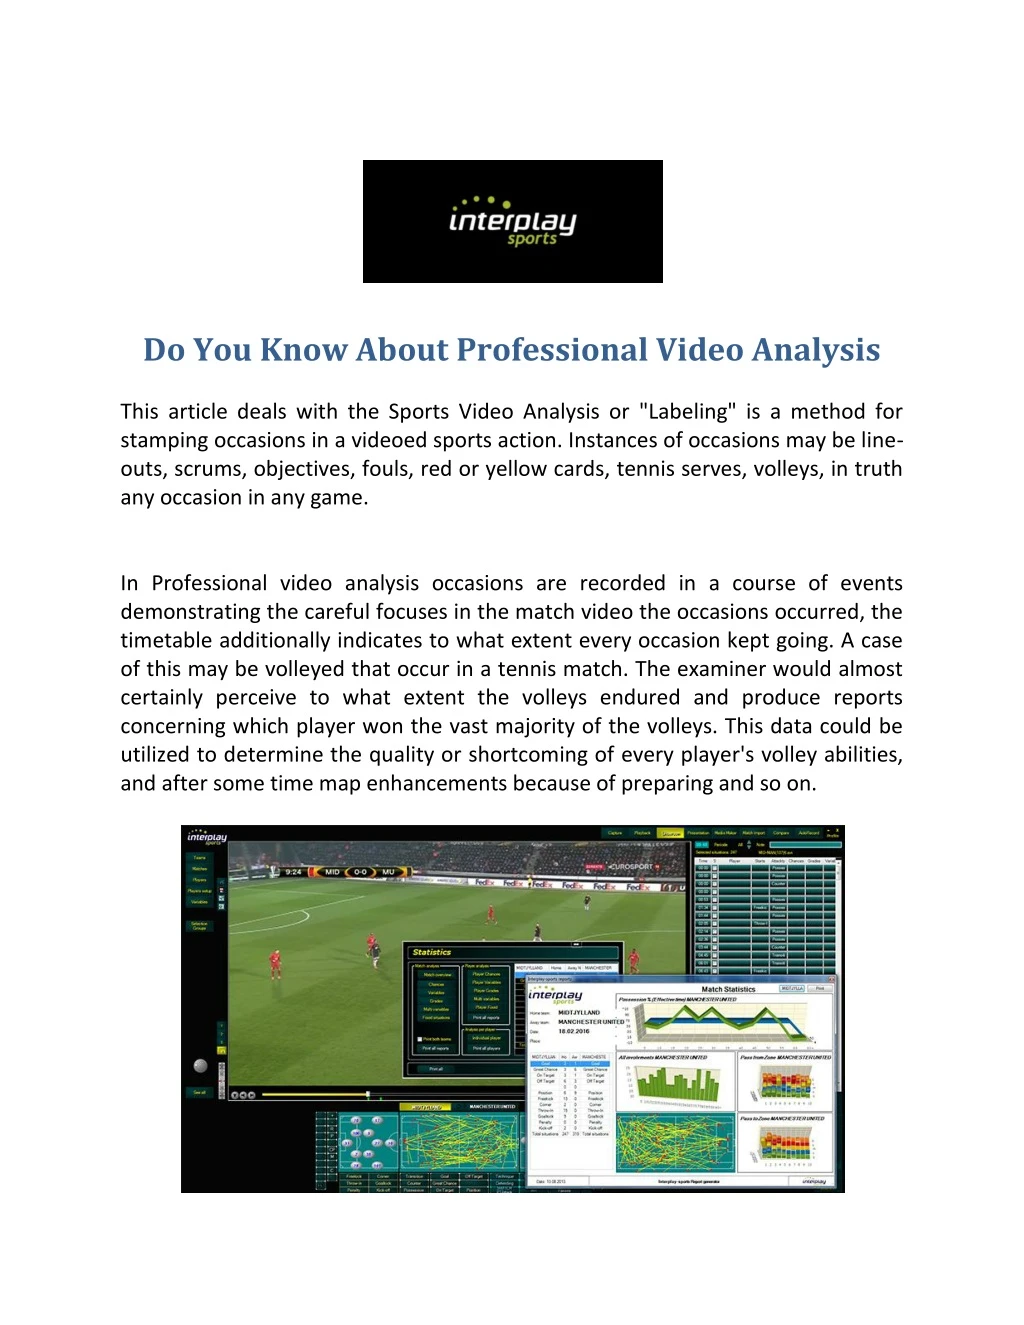 do you know about professional video analysis